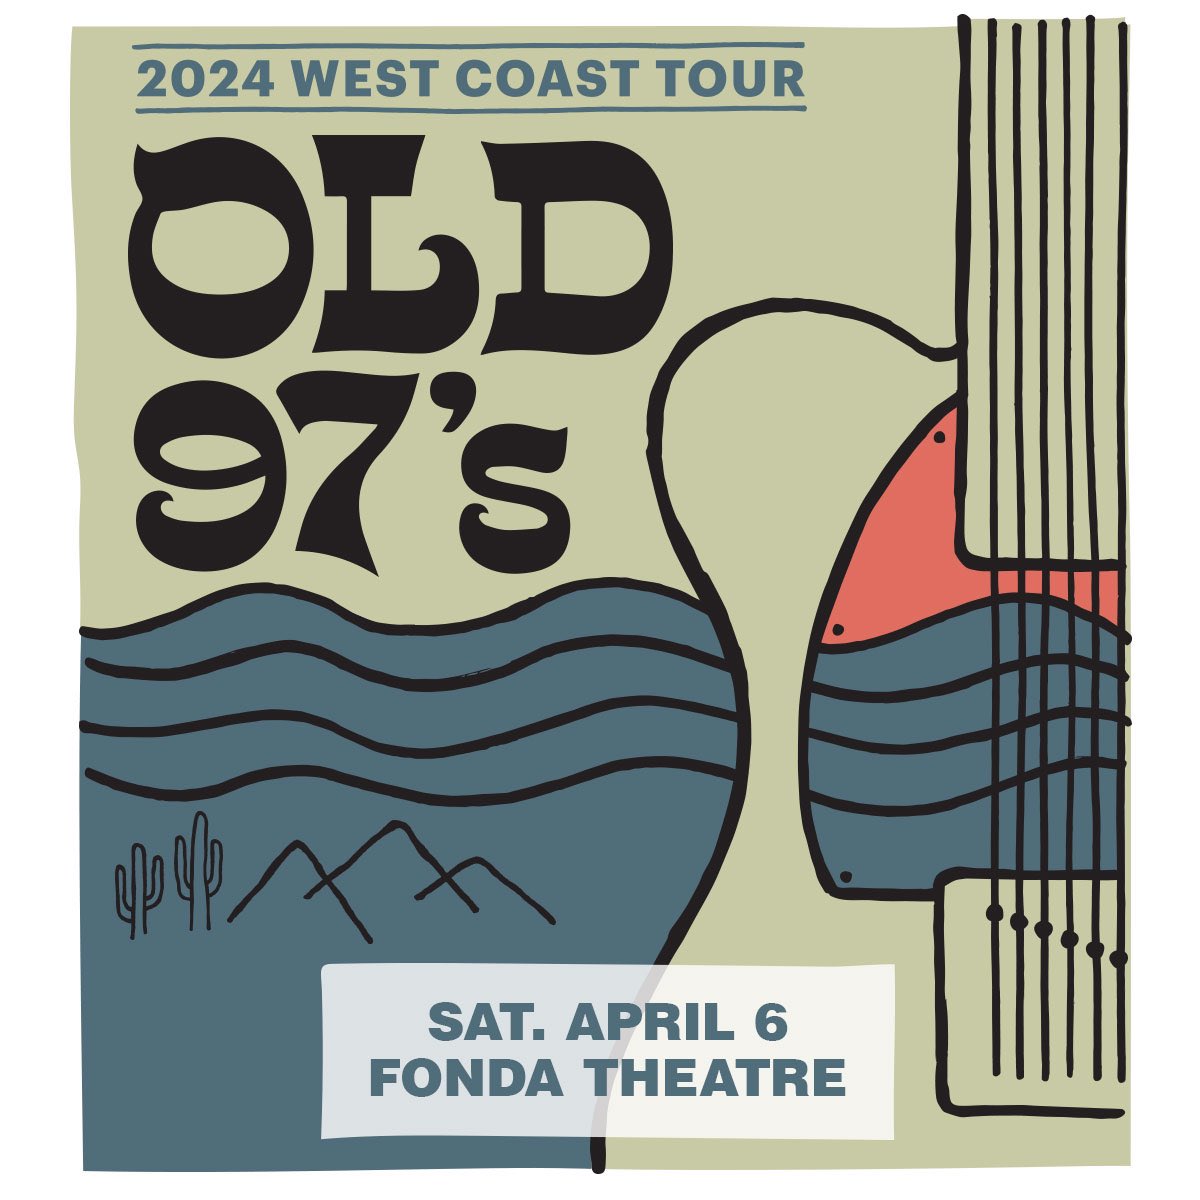 #giveaway Want a chance to WIN two tickets to see our friends Old 97’s on 4/6 at Fonda Theatre? Sign up for our newsletter at the link here: arep.co/m/jitv-giveawa… to receive emails about this opportunity, as well as future giveaways. #jaminthevan #old97s #fondatheatre